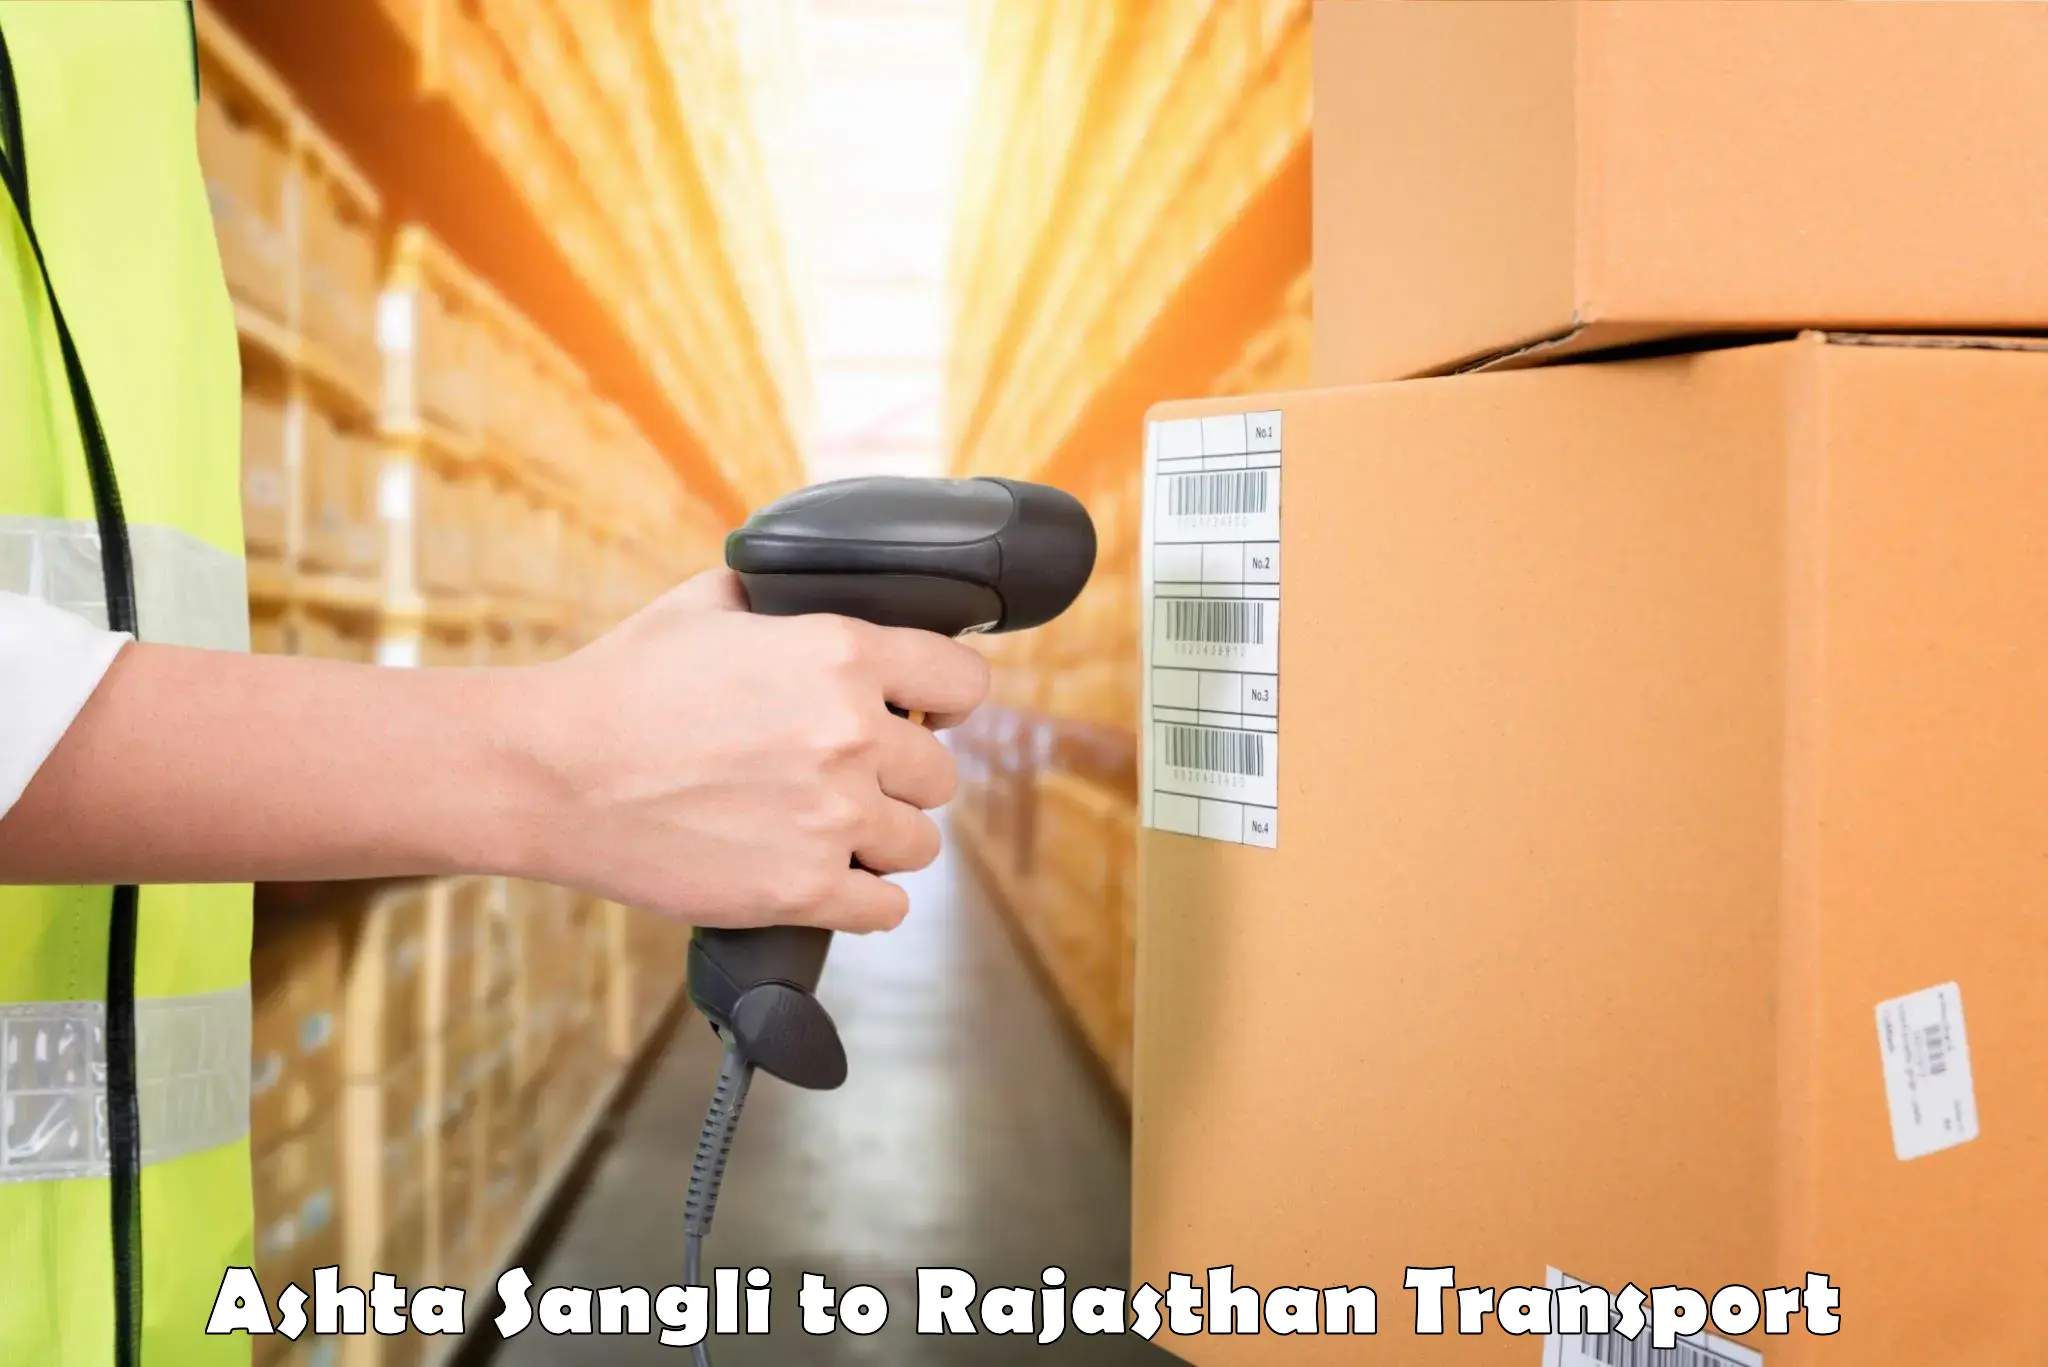 Truck transport companies in India Ashta Sangli to Lalsot